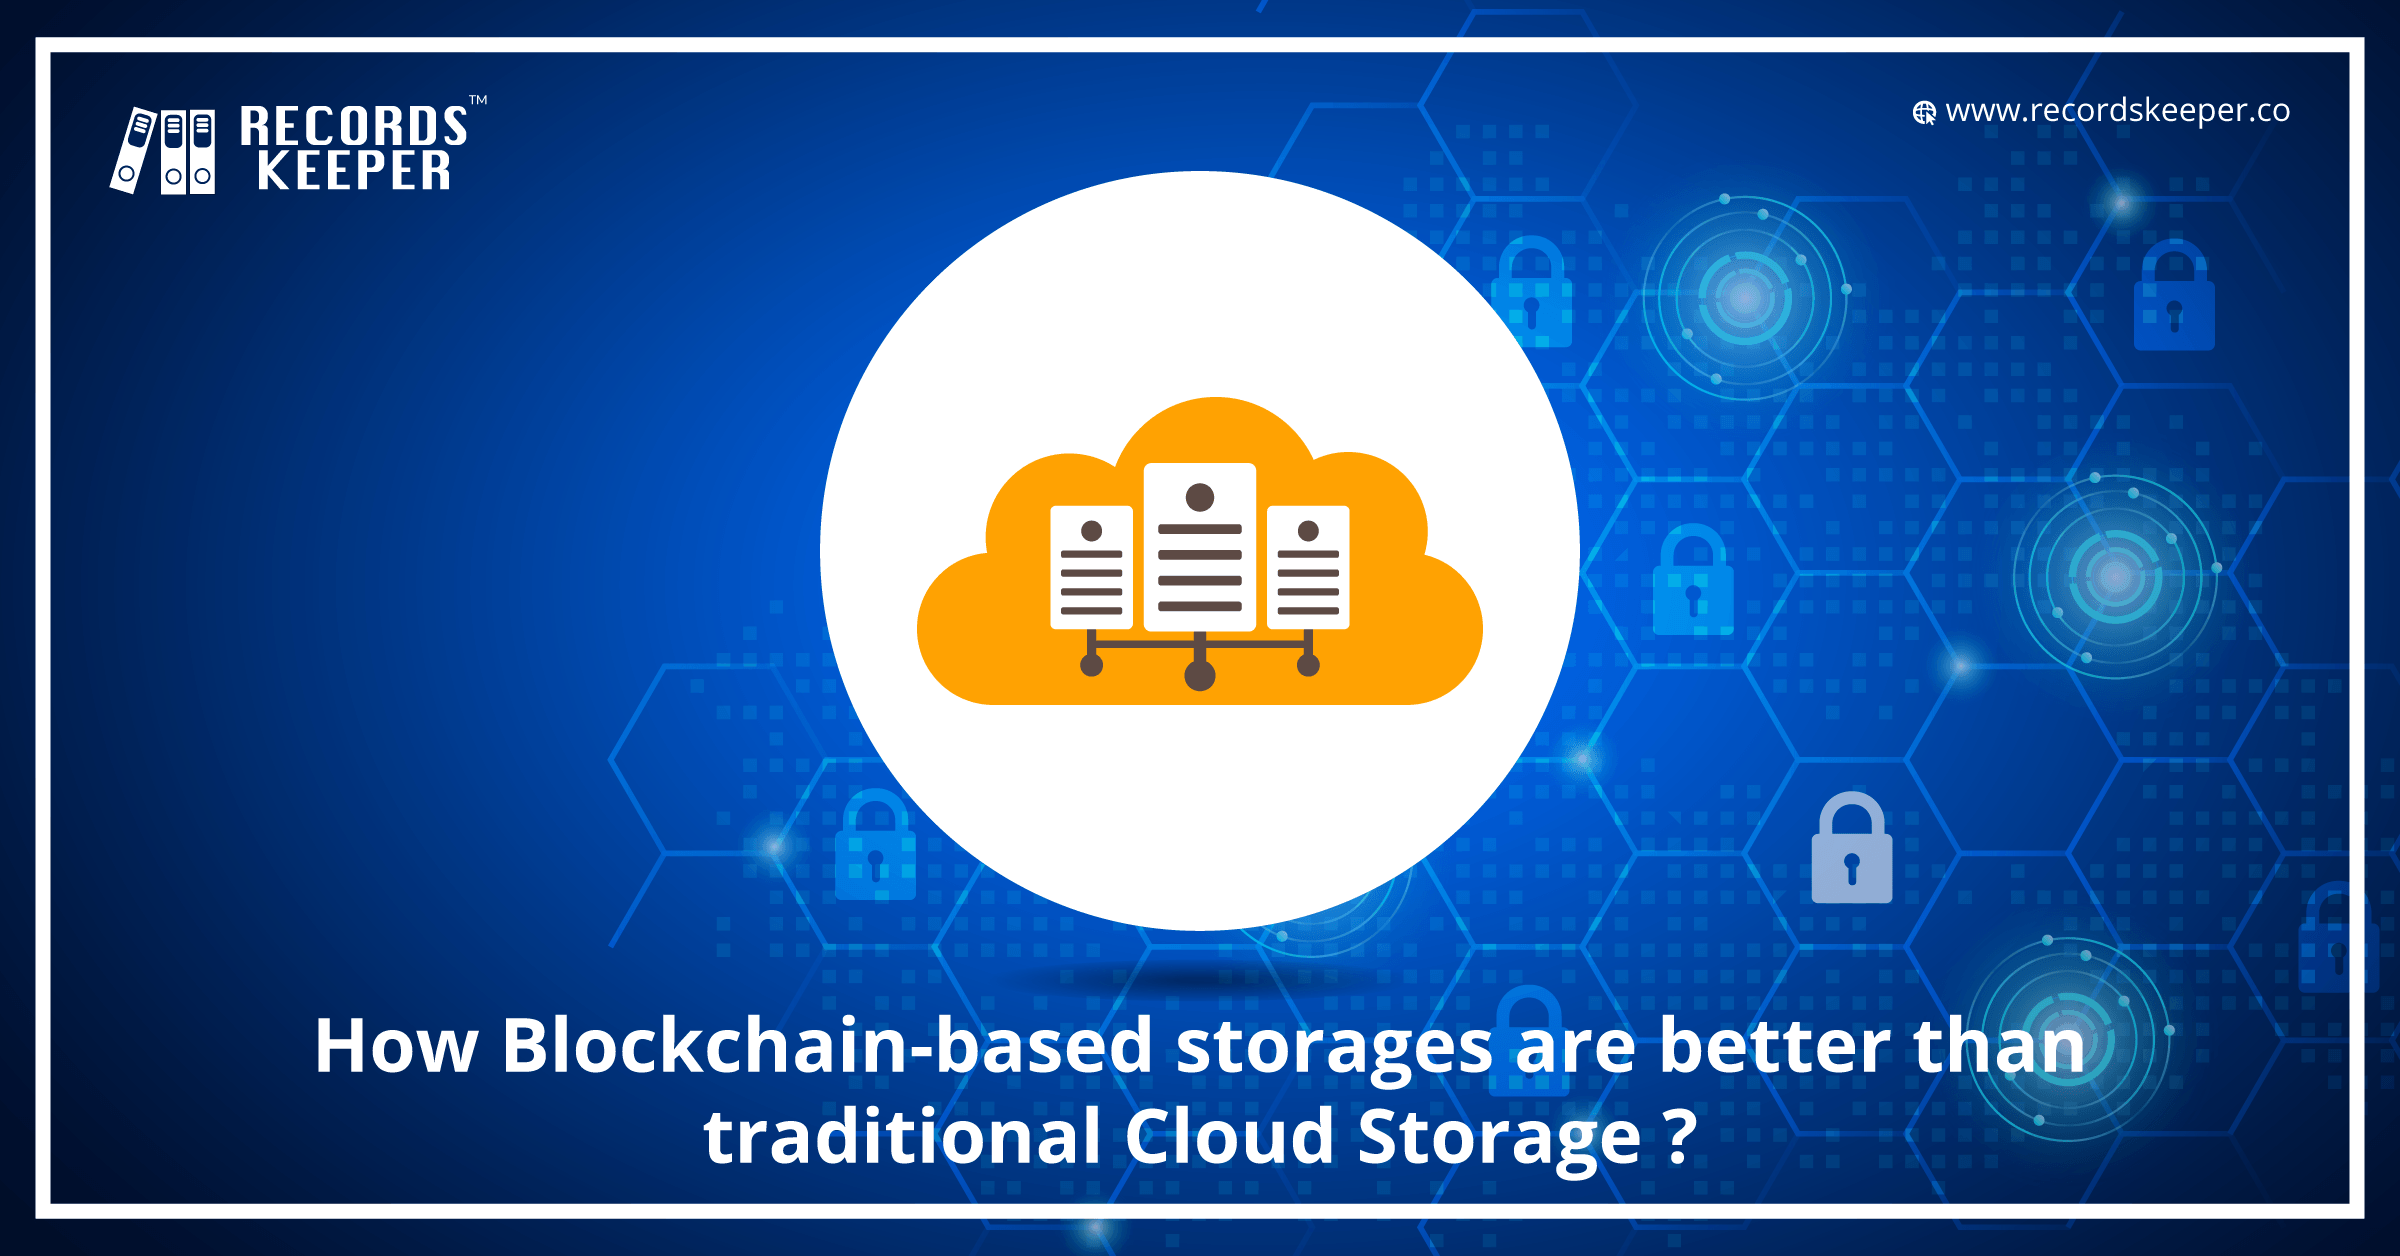 How Blockchain-based storages are better than traditional Cloud Storage?